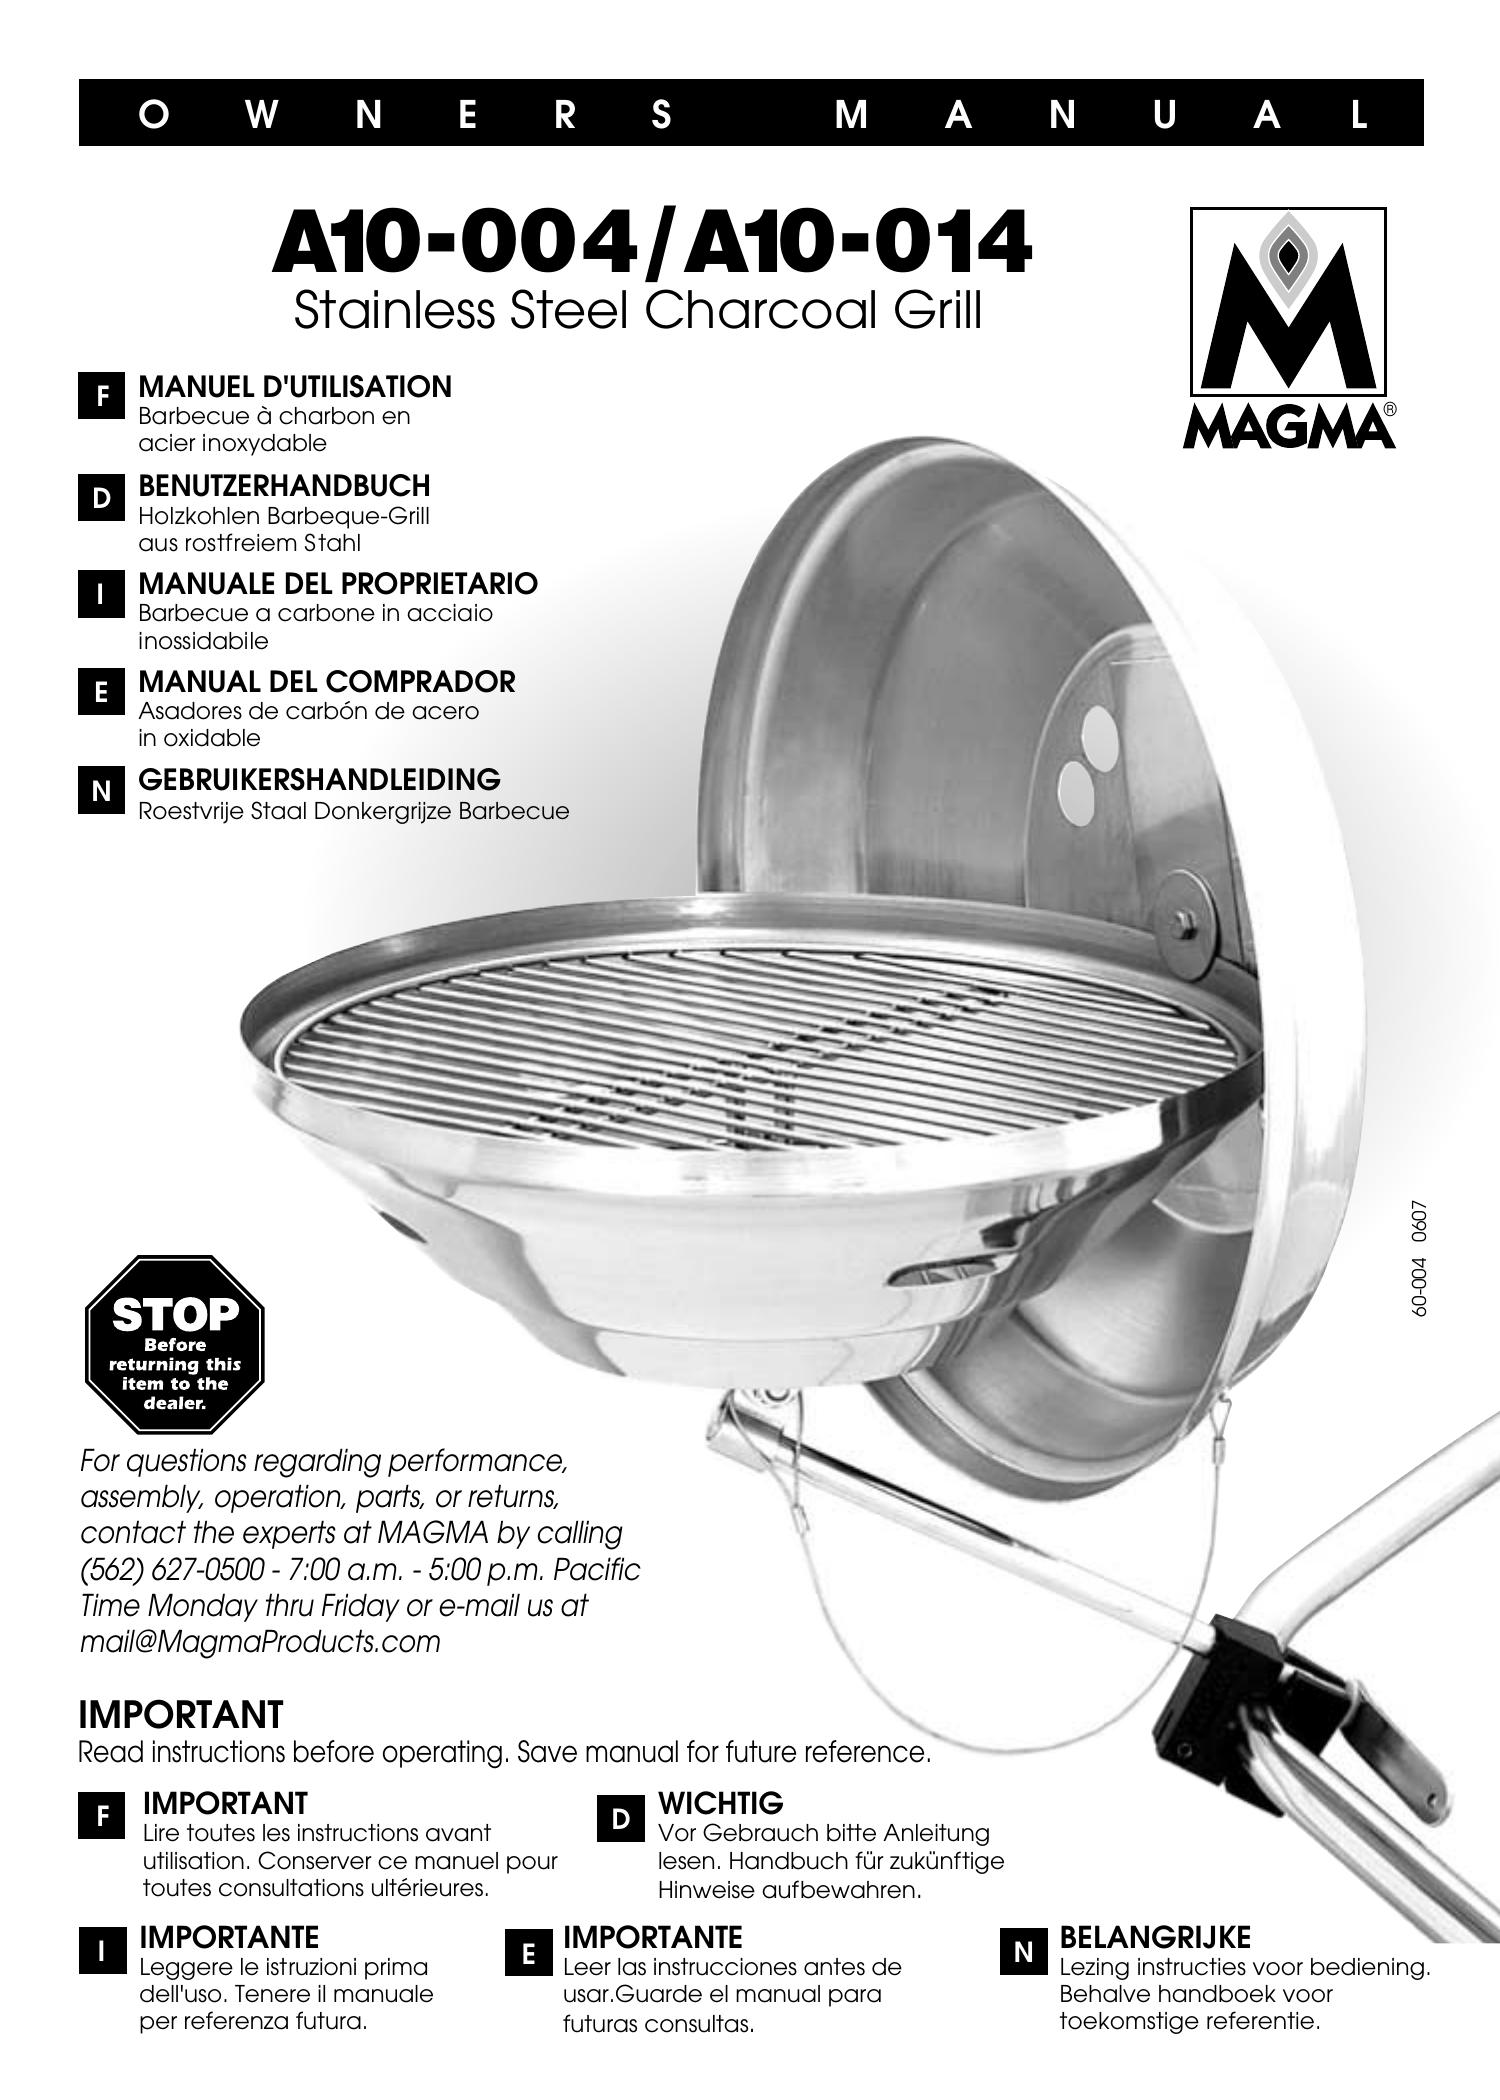 Magma A10-014 Charcoal Grill User Manual